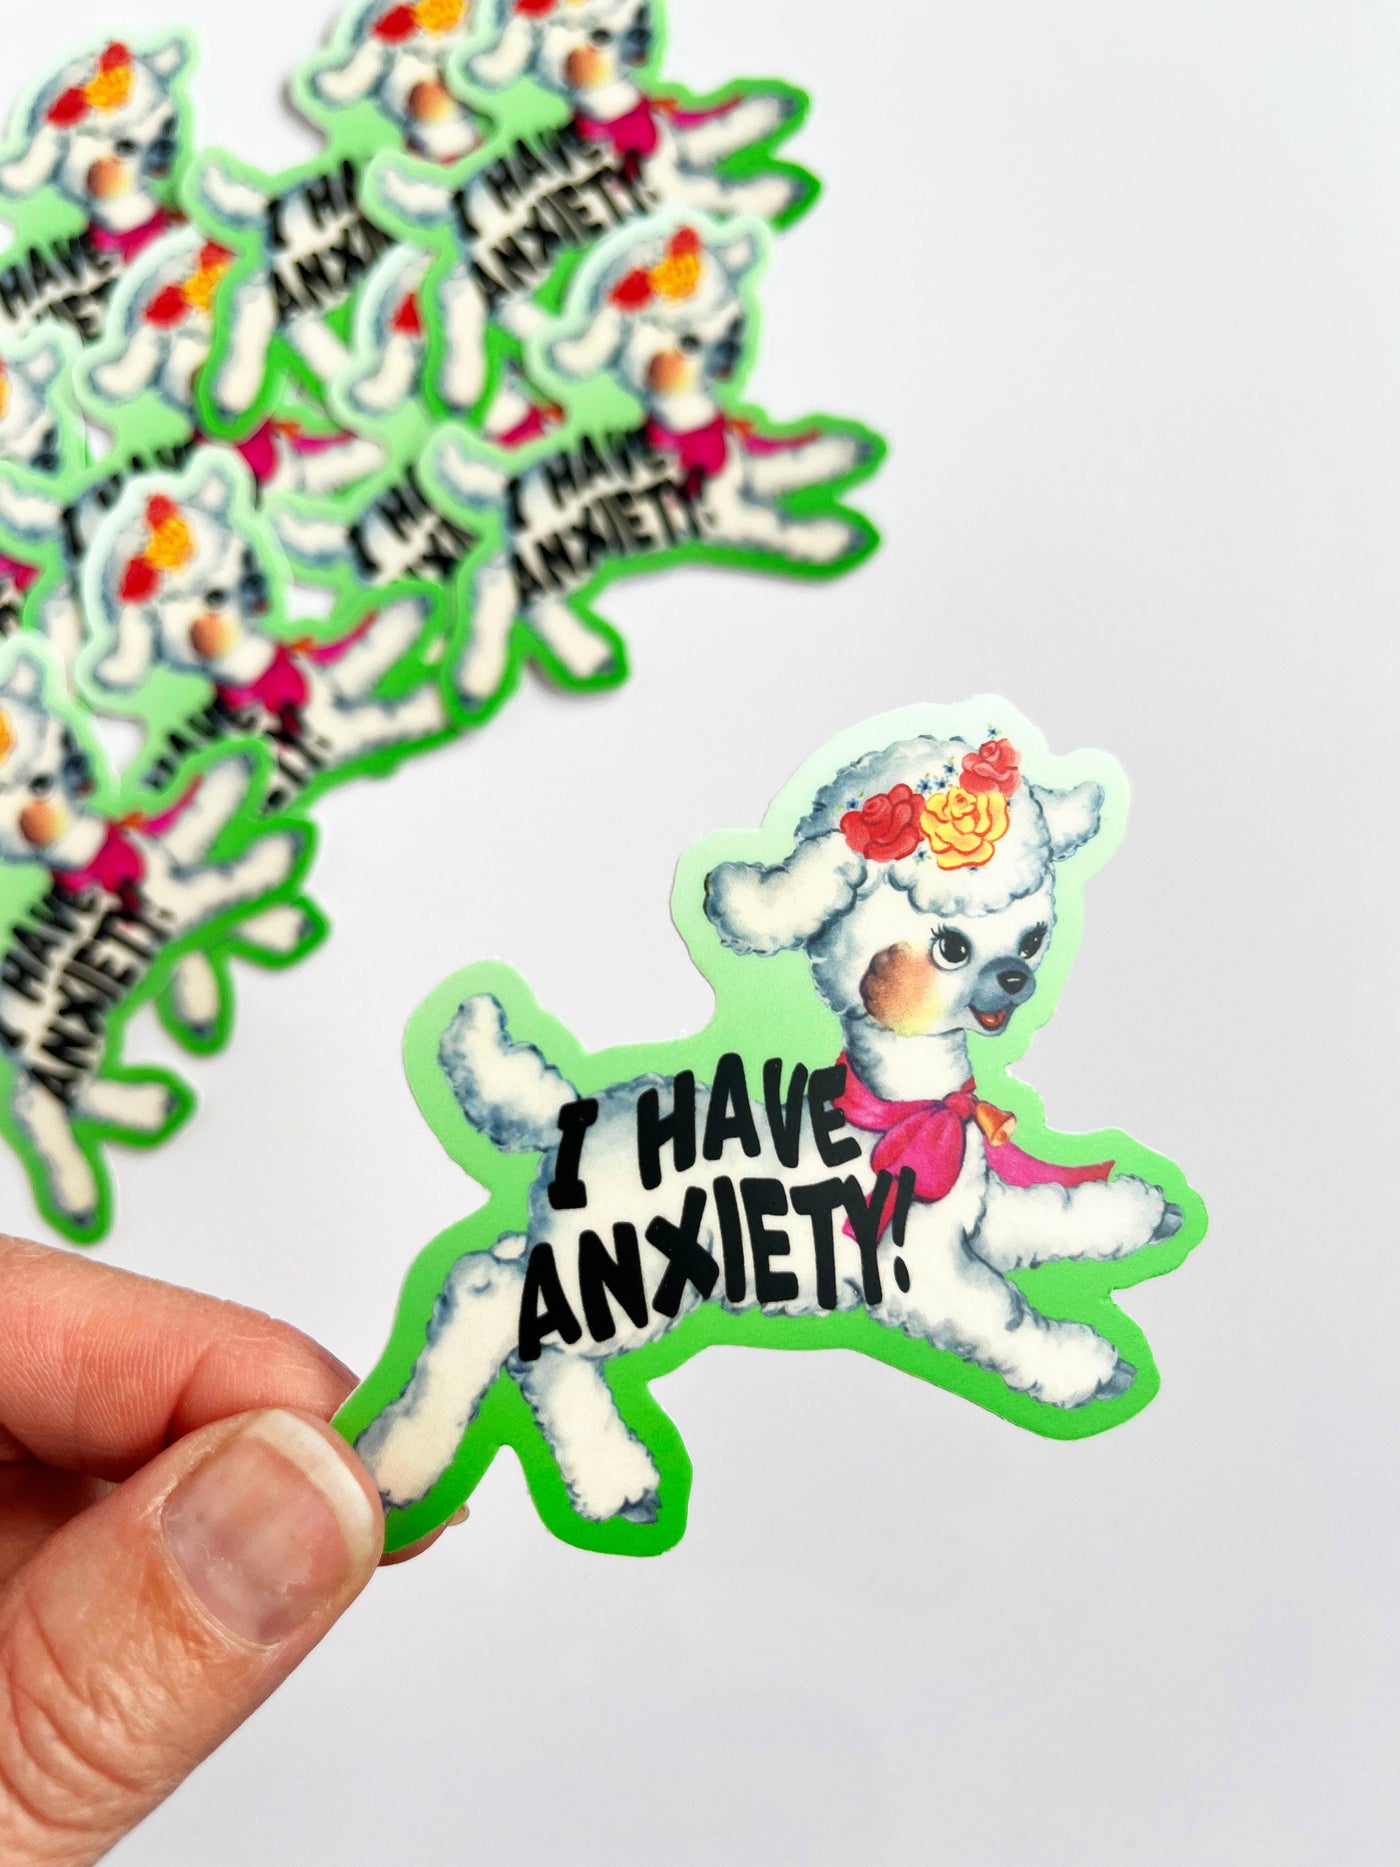 I Have Anxiety Cute Lamb Sticker